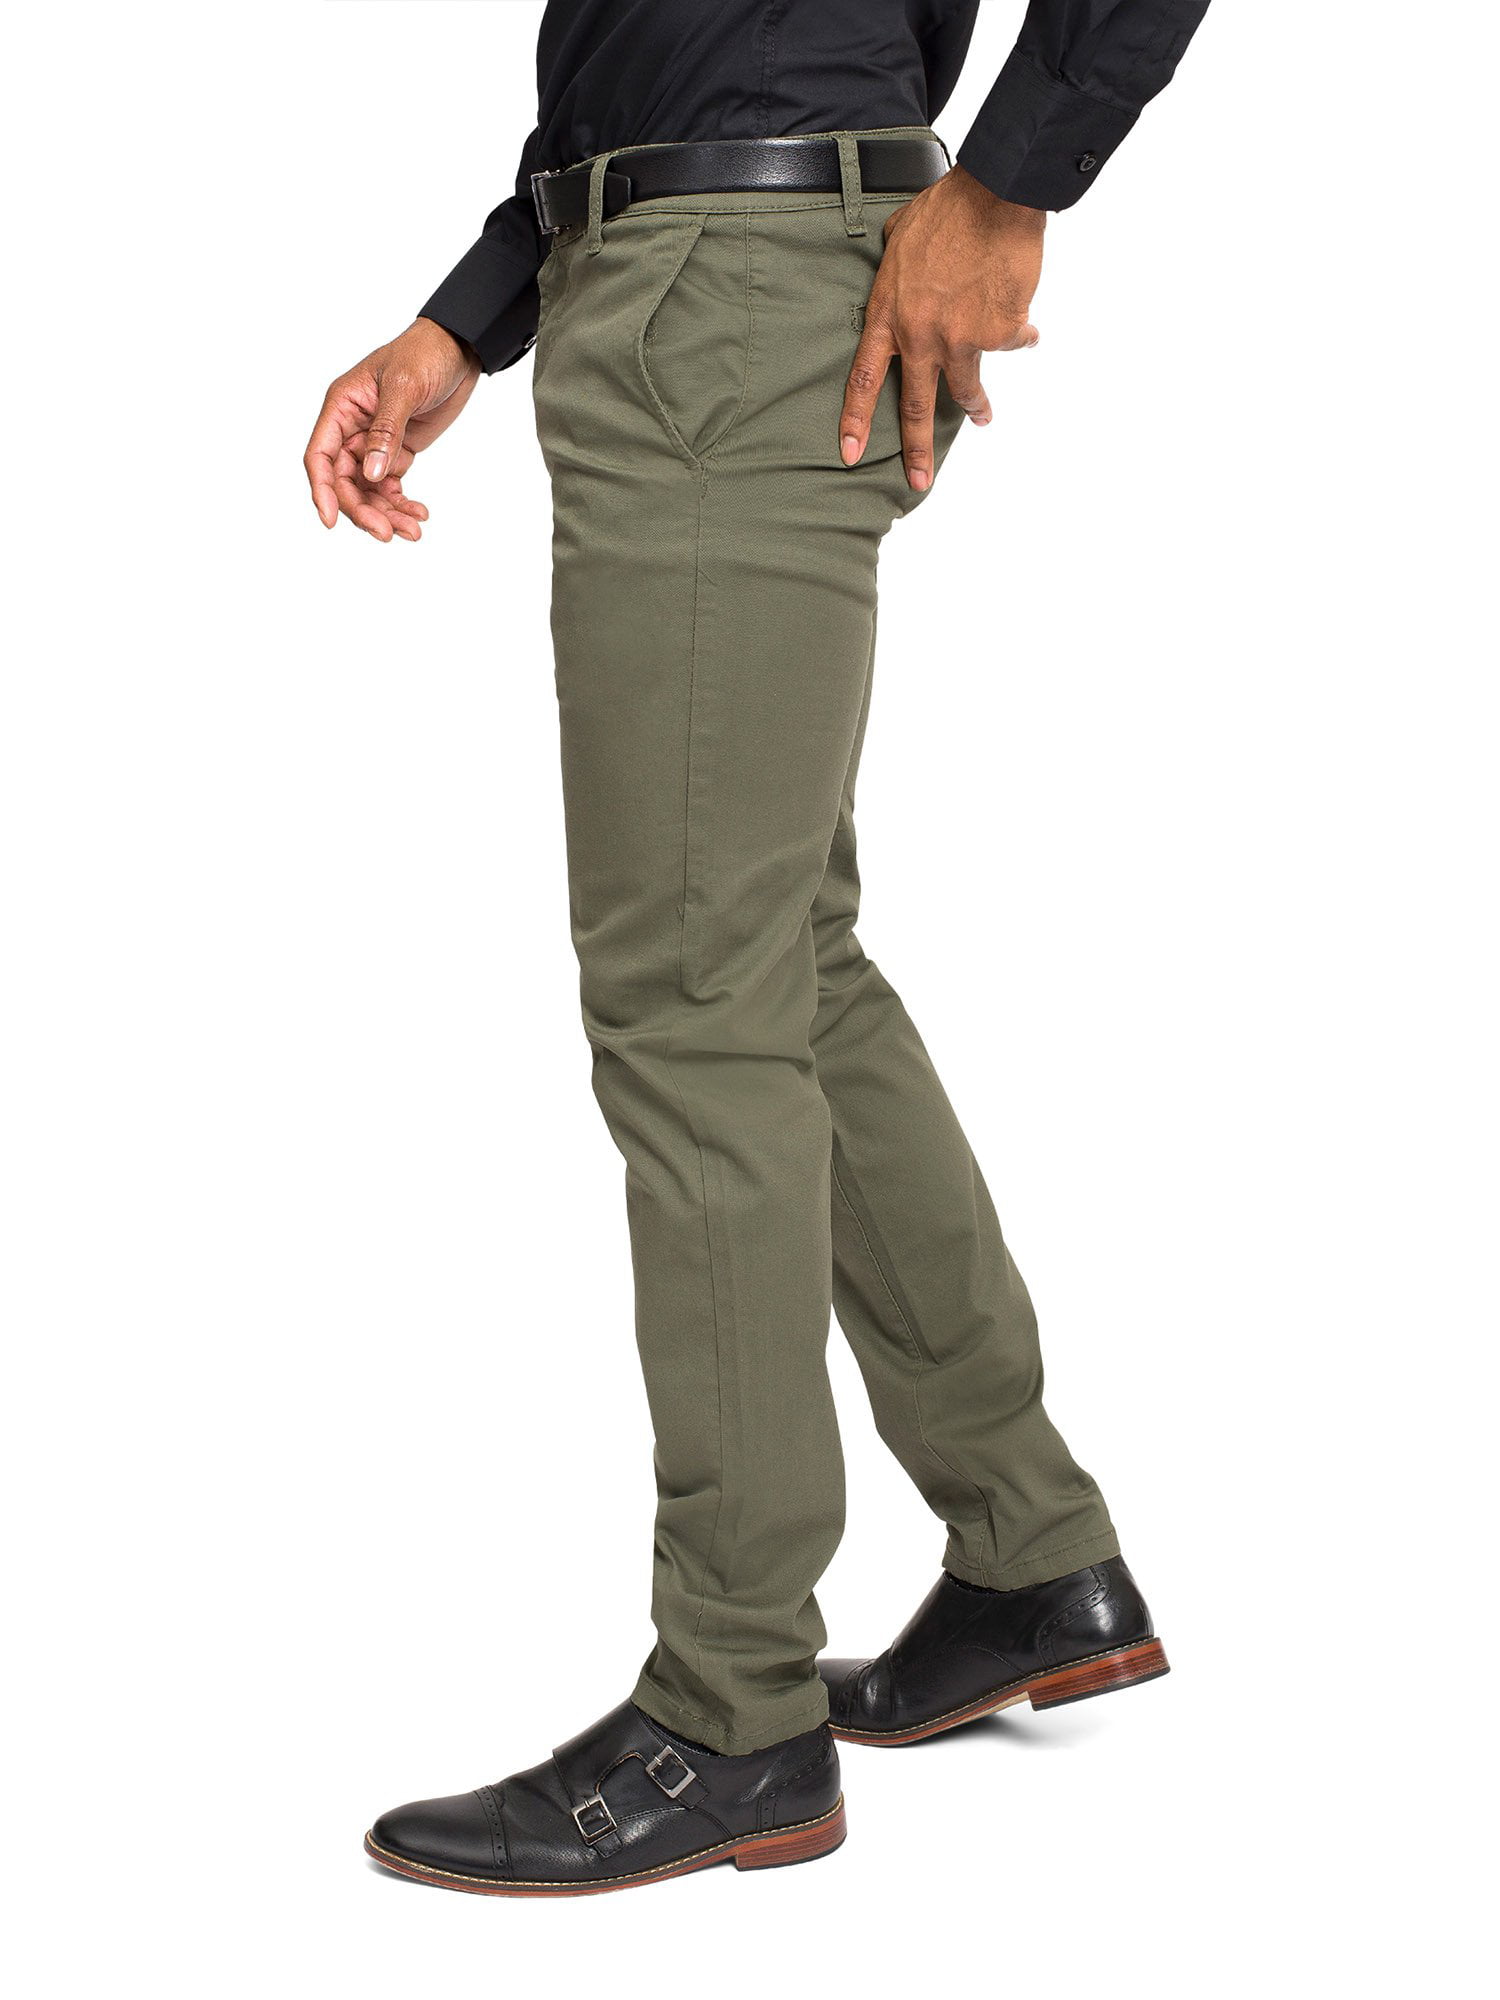 Victorious Men's Basic Casual Slim Fit Stretch Chino Pants DL1250 - Olive -  30/32